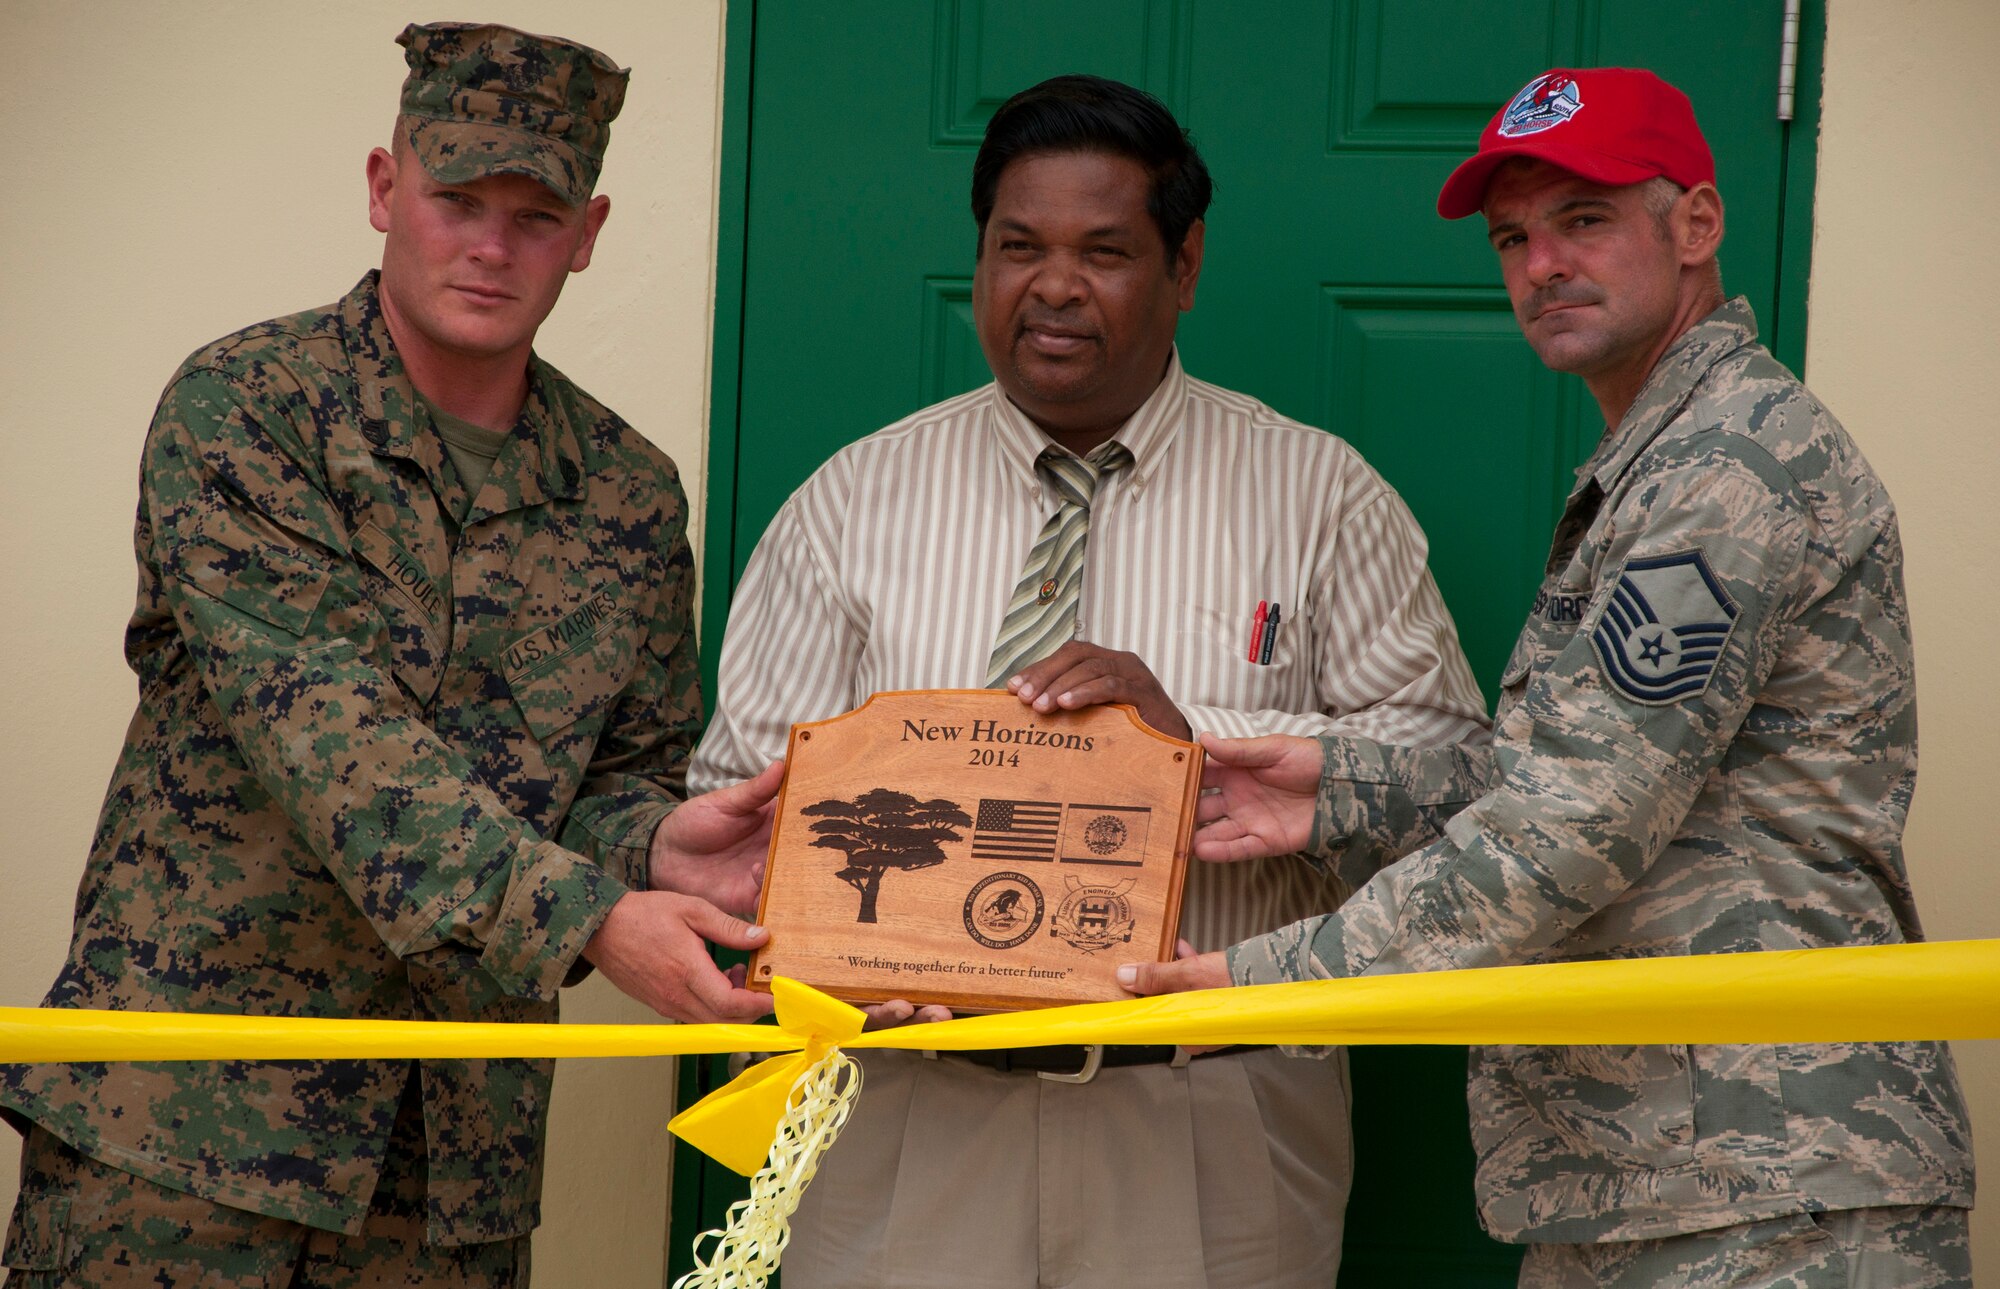 U.S. Marine Corps Staff Sgt. Matt Houle, construction site foreman, left, and U.S. Air Force Master Sgt. Nicholas Alessi, construction site project manager, right, present a plaque to Rodrick Cardinez, Edward P. Yorke school principal, during the ribbon cutting ceremony June 4, 2014, at the school in Belize City, Belize. The school's 1,372 square foot, two-classroom addition is one of five New Horizons projects in the country. New Horizons is an annual multinational exercise that provides training opportunities in civil engineering and medical care. (U.S. Air Force photo by Tech. Sgt. Kali L. Gradishar/Released)